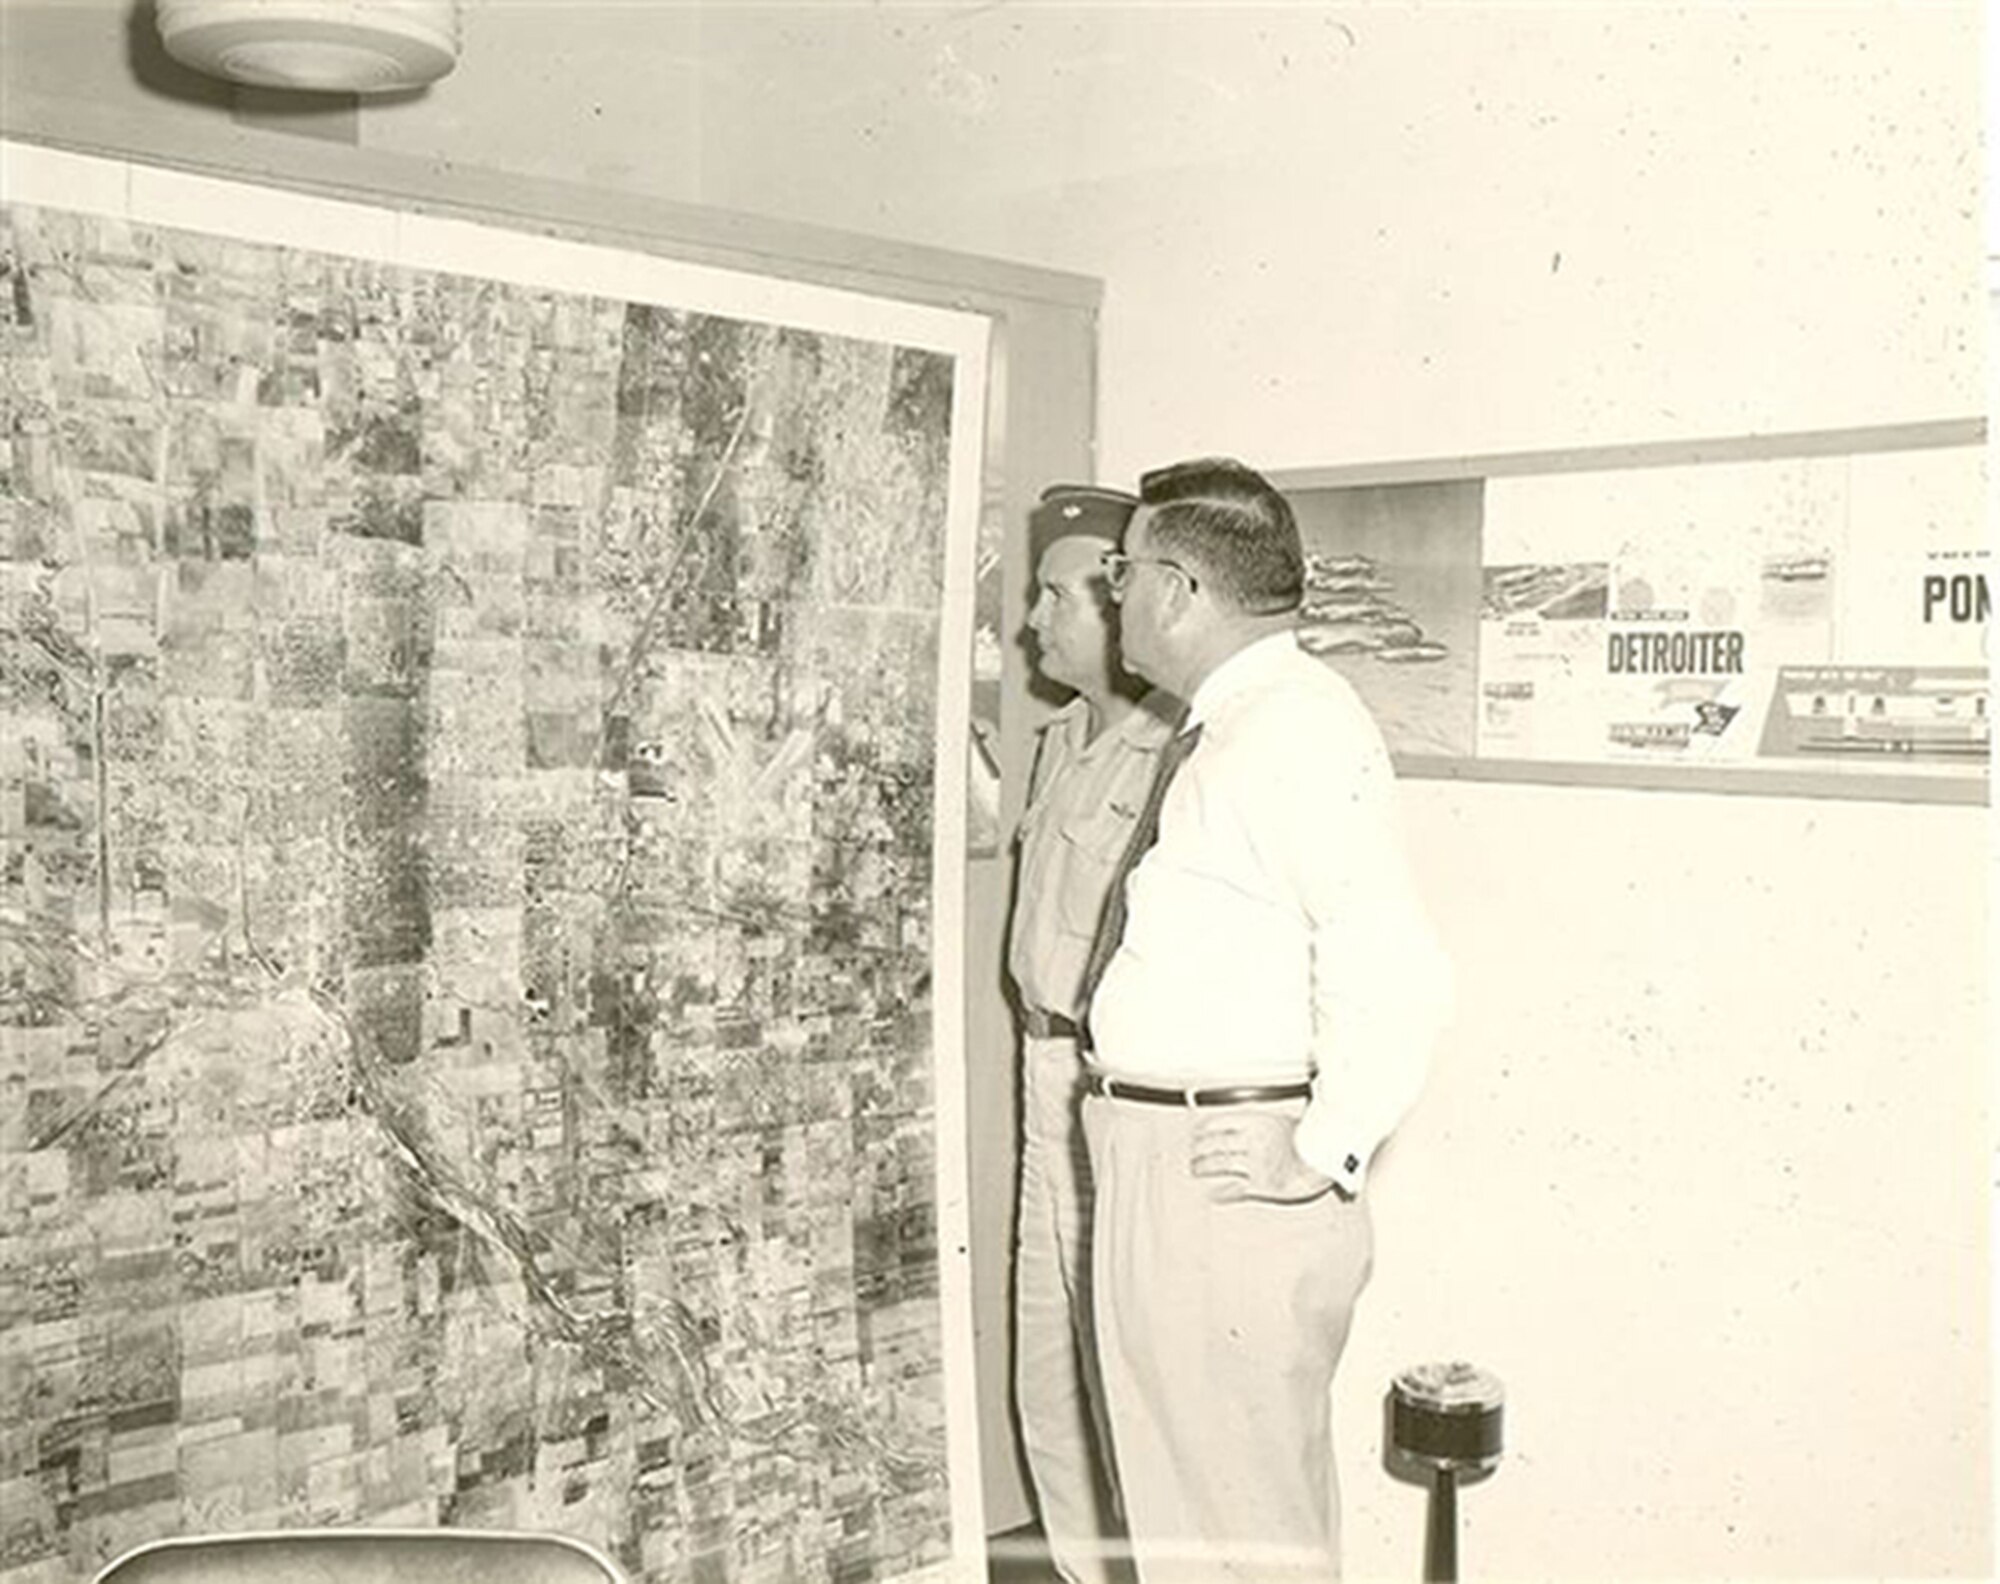 Lt. Col. Carl Boggs, 117th commander, showing one the squadron's aerial photos to a local businessman from the Hutchinson area.